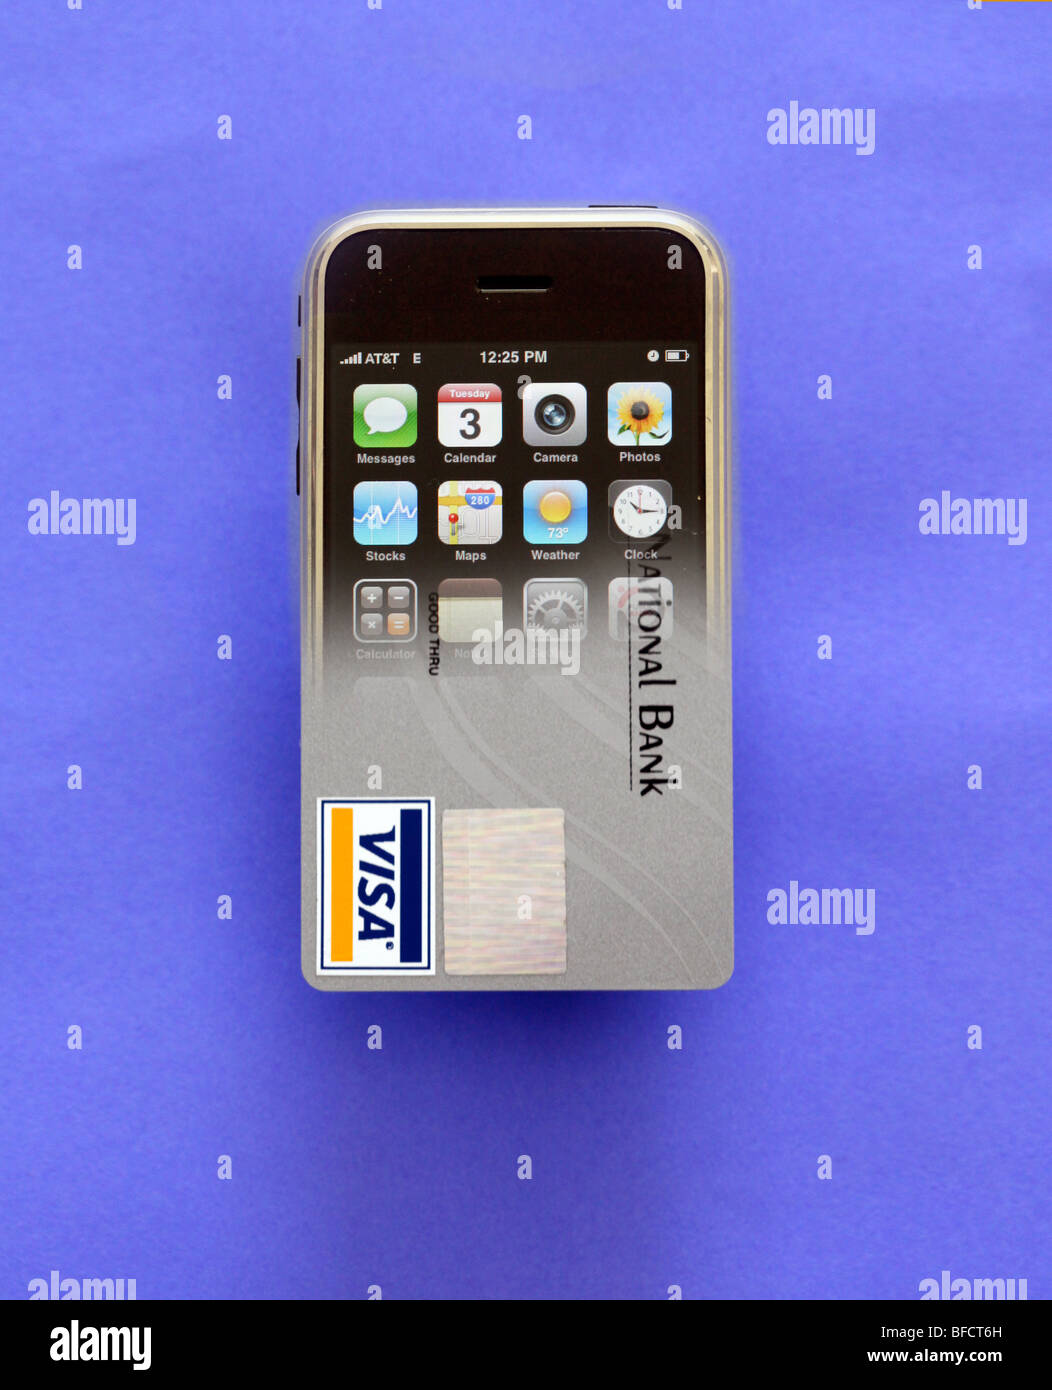 Iphone cell phone morphed with Visa credit card to illustrate using your phone to make purchases. Stock Photo